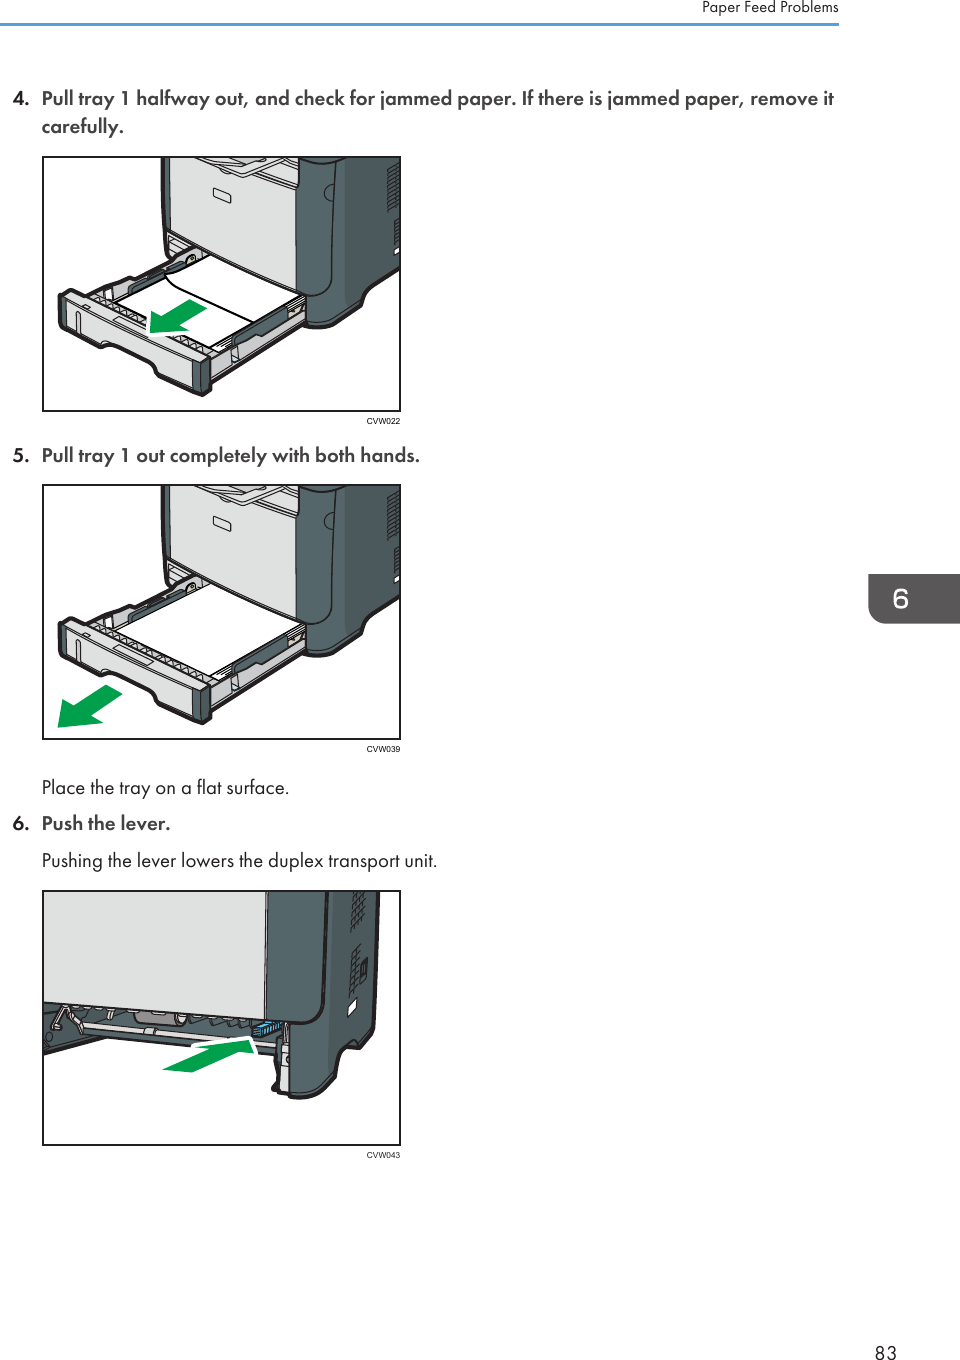 4. Pull tray 1 halfway out, and check for jammed paper. If there is jammed paper, remove itcarefully.CVW0225. Pull tray 1 out completely with both hands.CVW039Place the tray on a flat surface.6. Push the lever.Pushing the lever lowers the duplex transport unit.CVW043Paper Feed Problems83